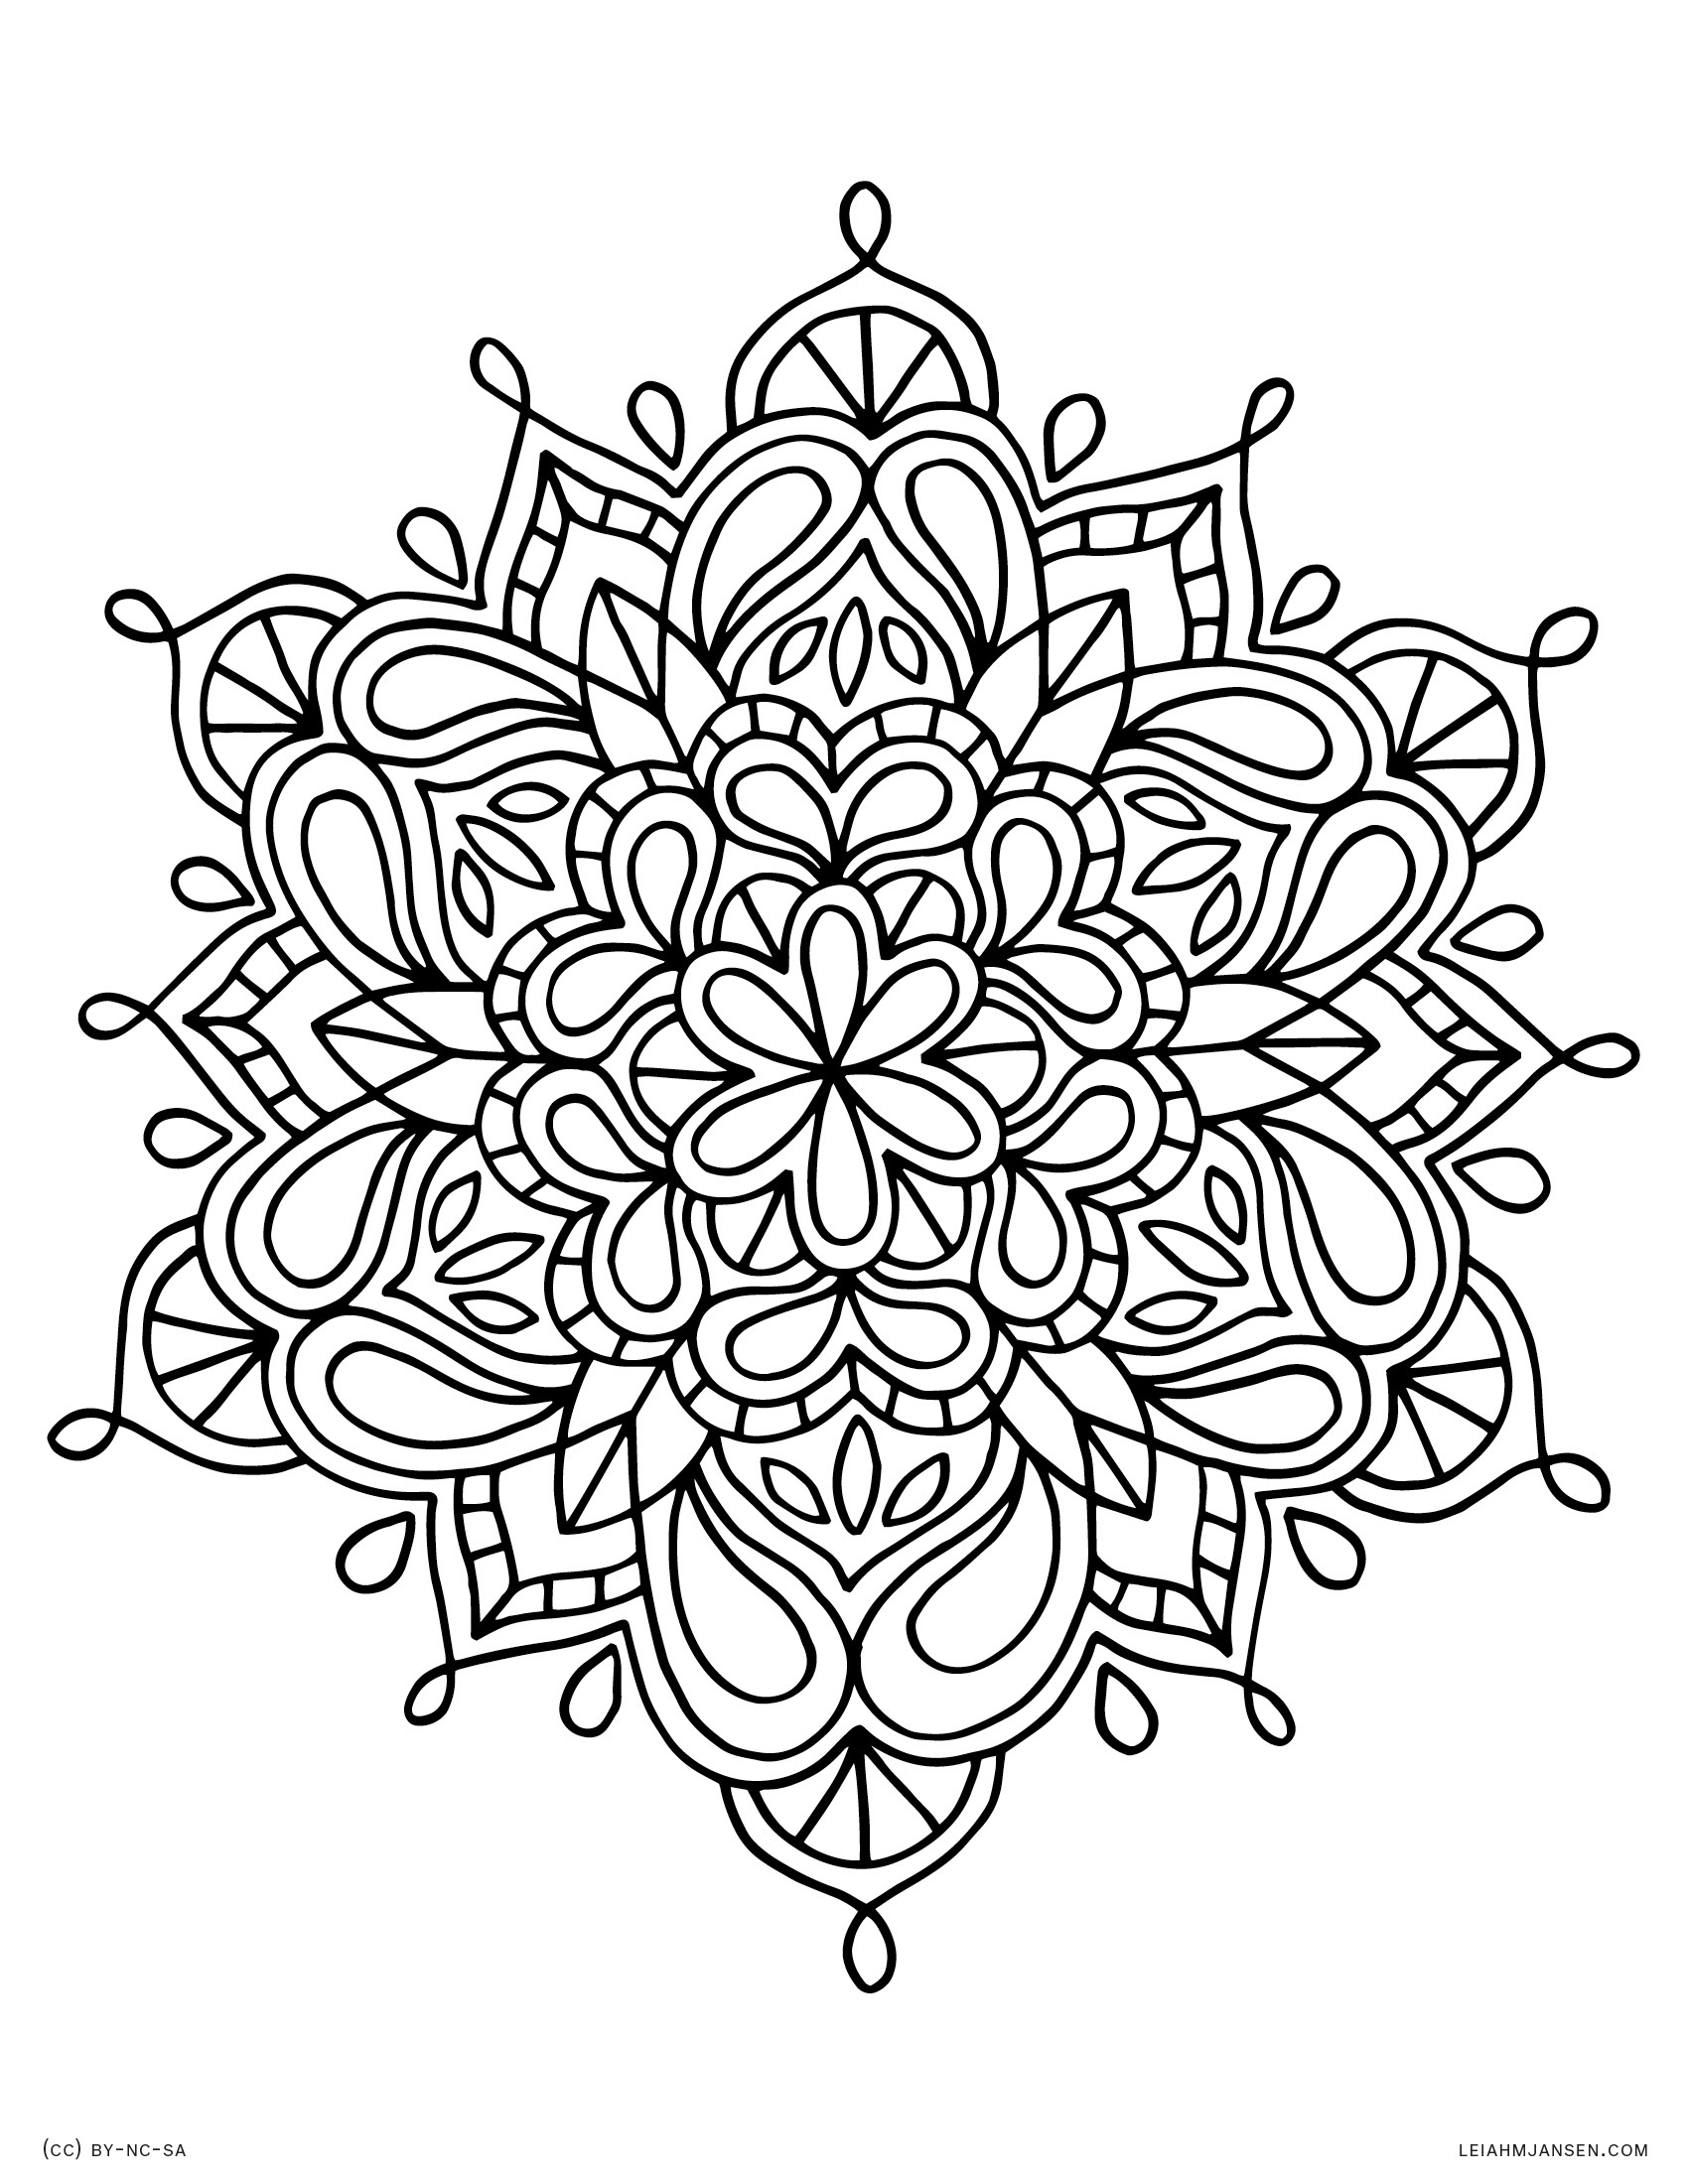 Coloring Pages - Free Printable Mandala Coloring Pages